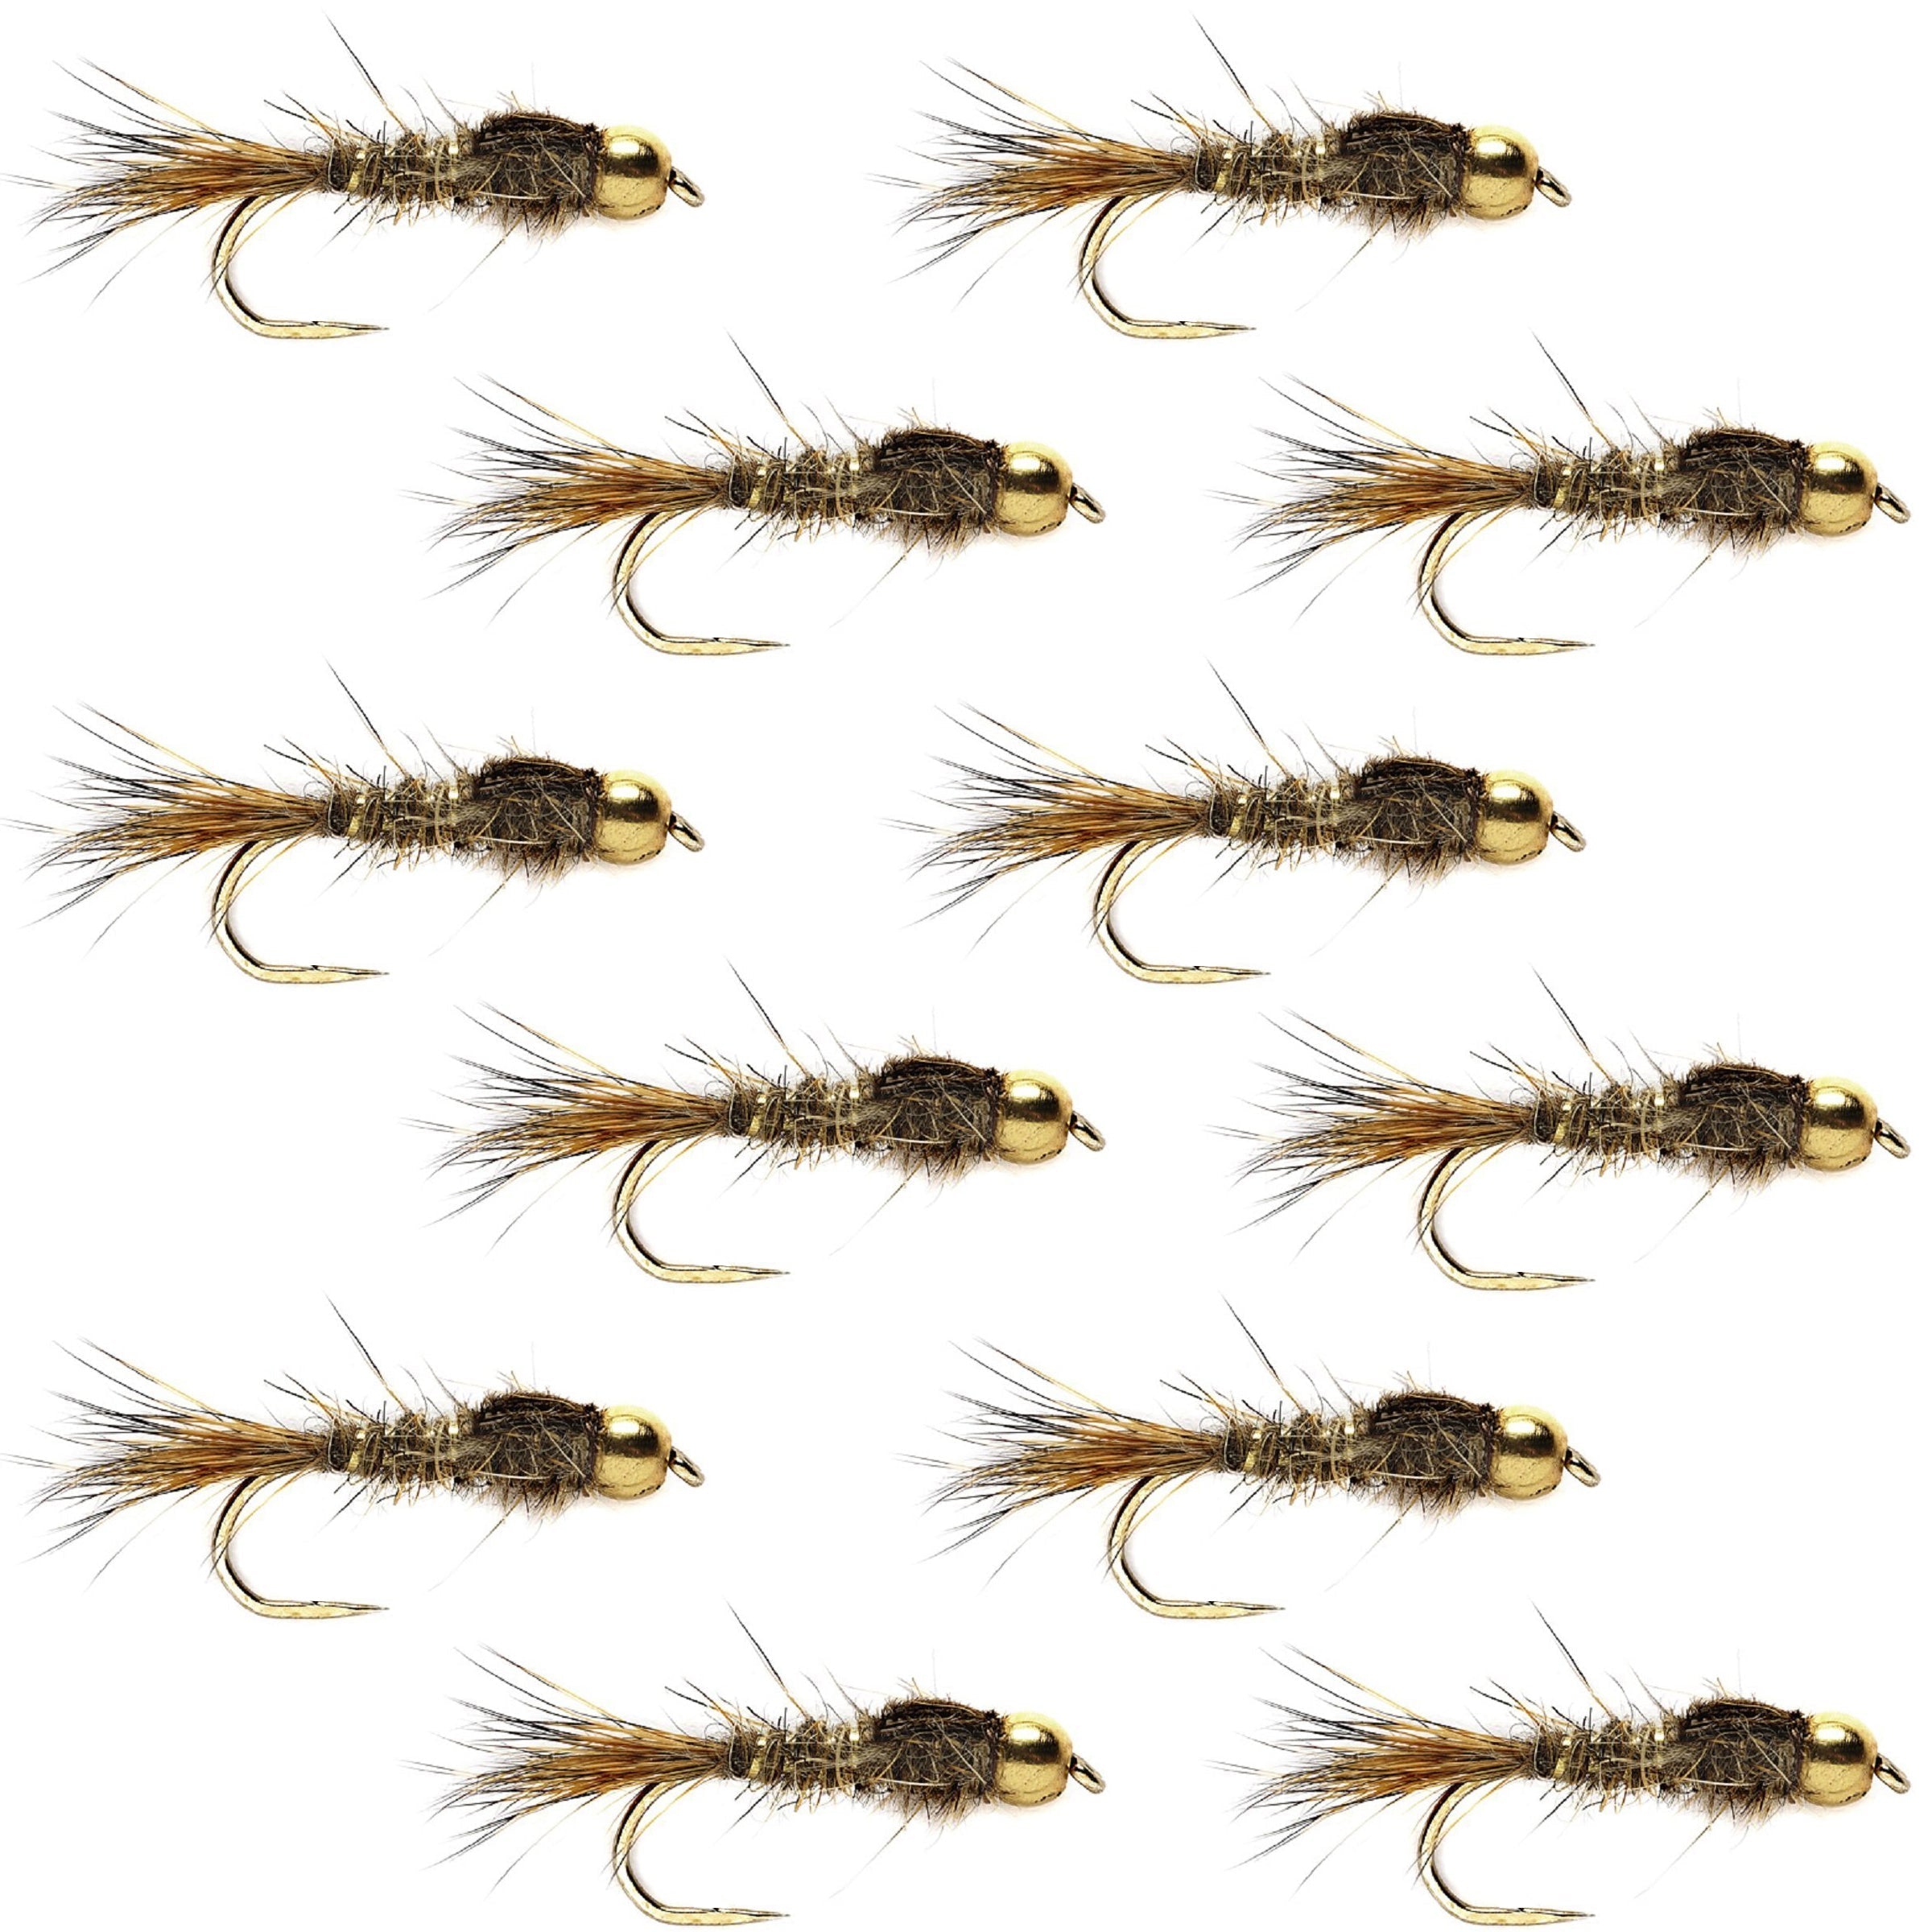 Barbless Bead Head Gold Ribbed Hare's Ear Nymph 1 Dozen Flies Hook Size 10